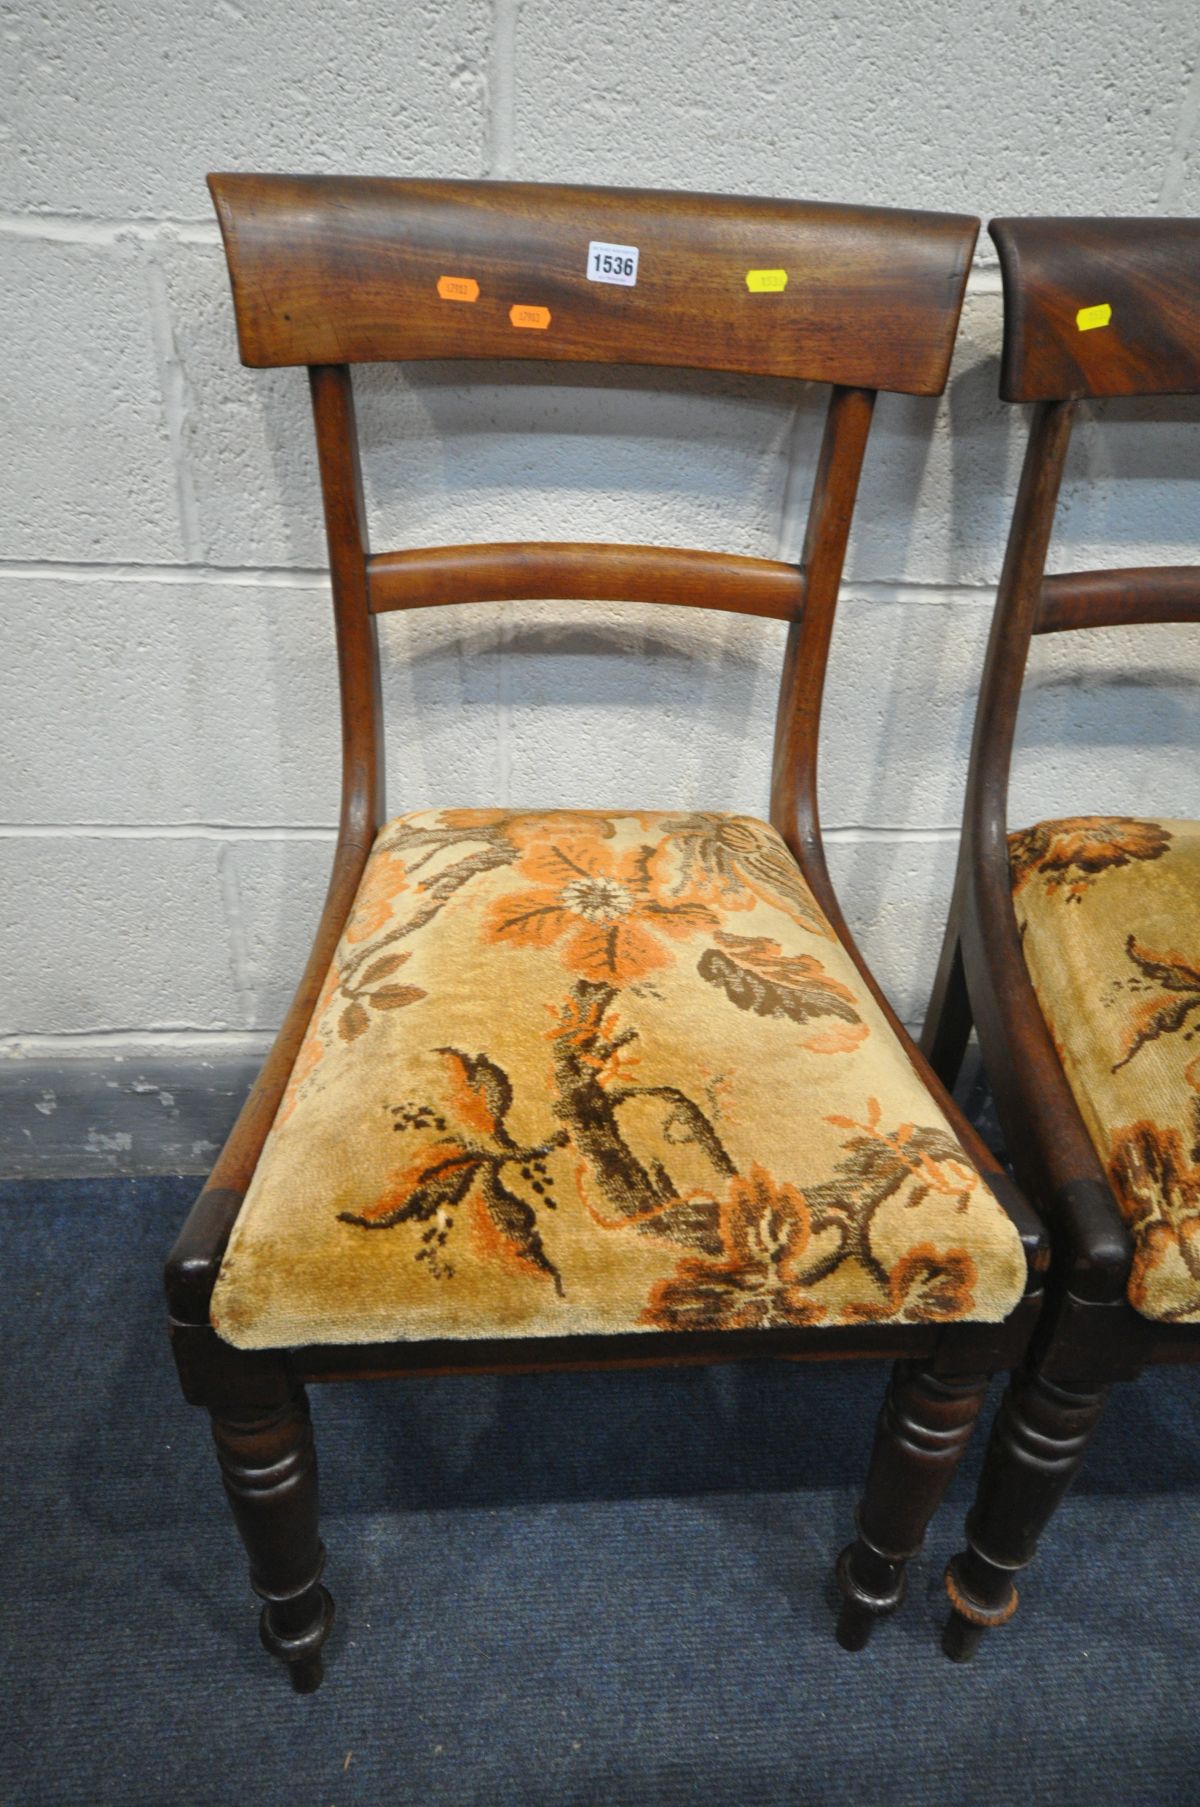 A PAIR OF REGENCY MAHOGANY BAR BACK CHAIRS, with floral upholstered seat pads, turned front legs ( - Image 2 of 4